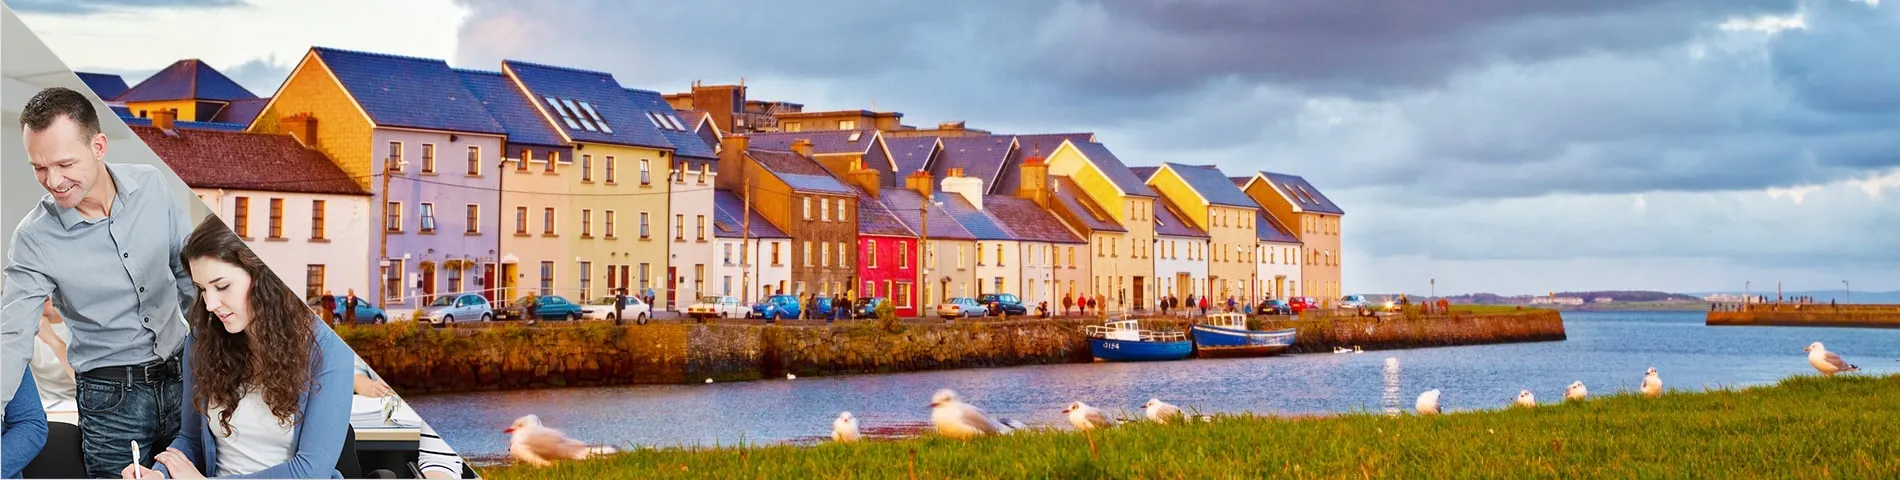 Galway - 